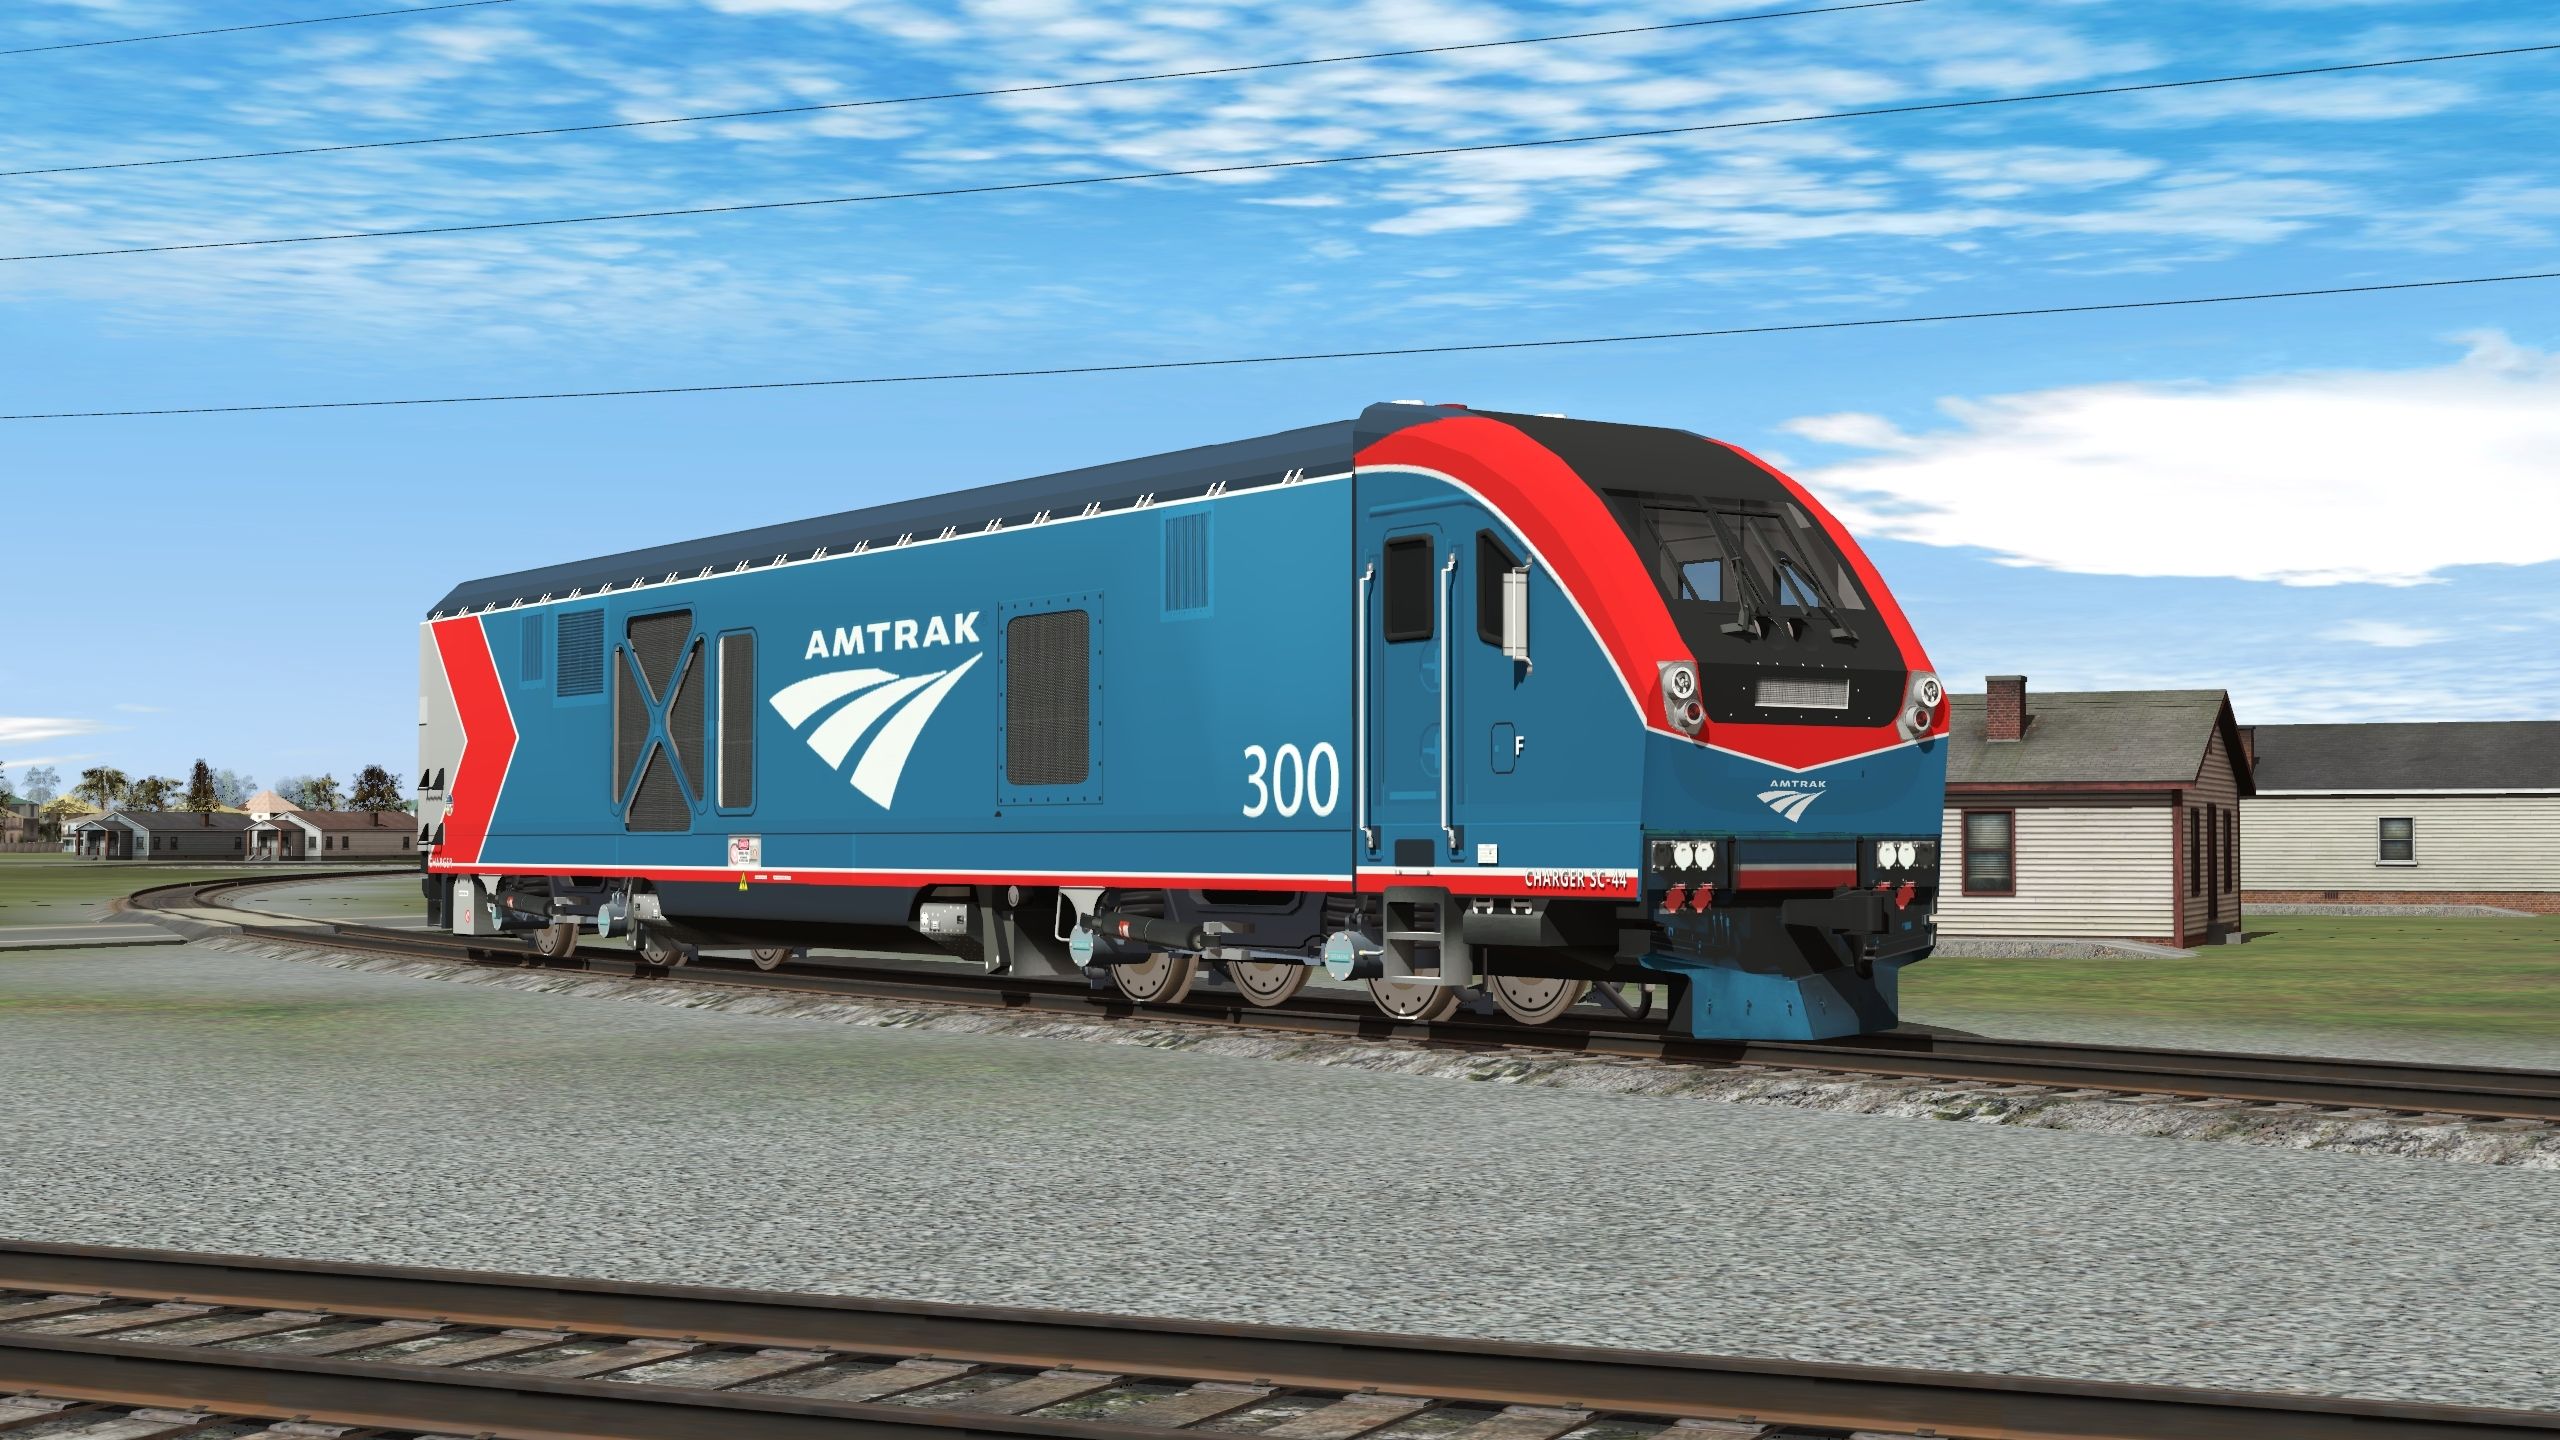 Trainz Discussion Forums - Show off your reskins! - Page 550